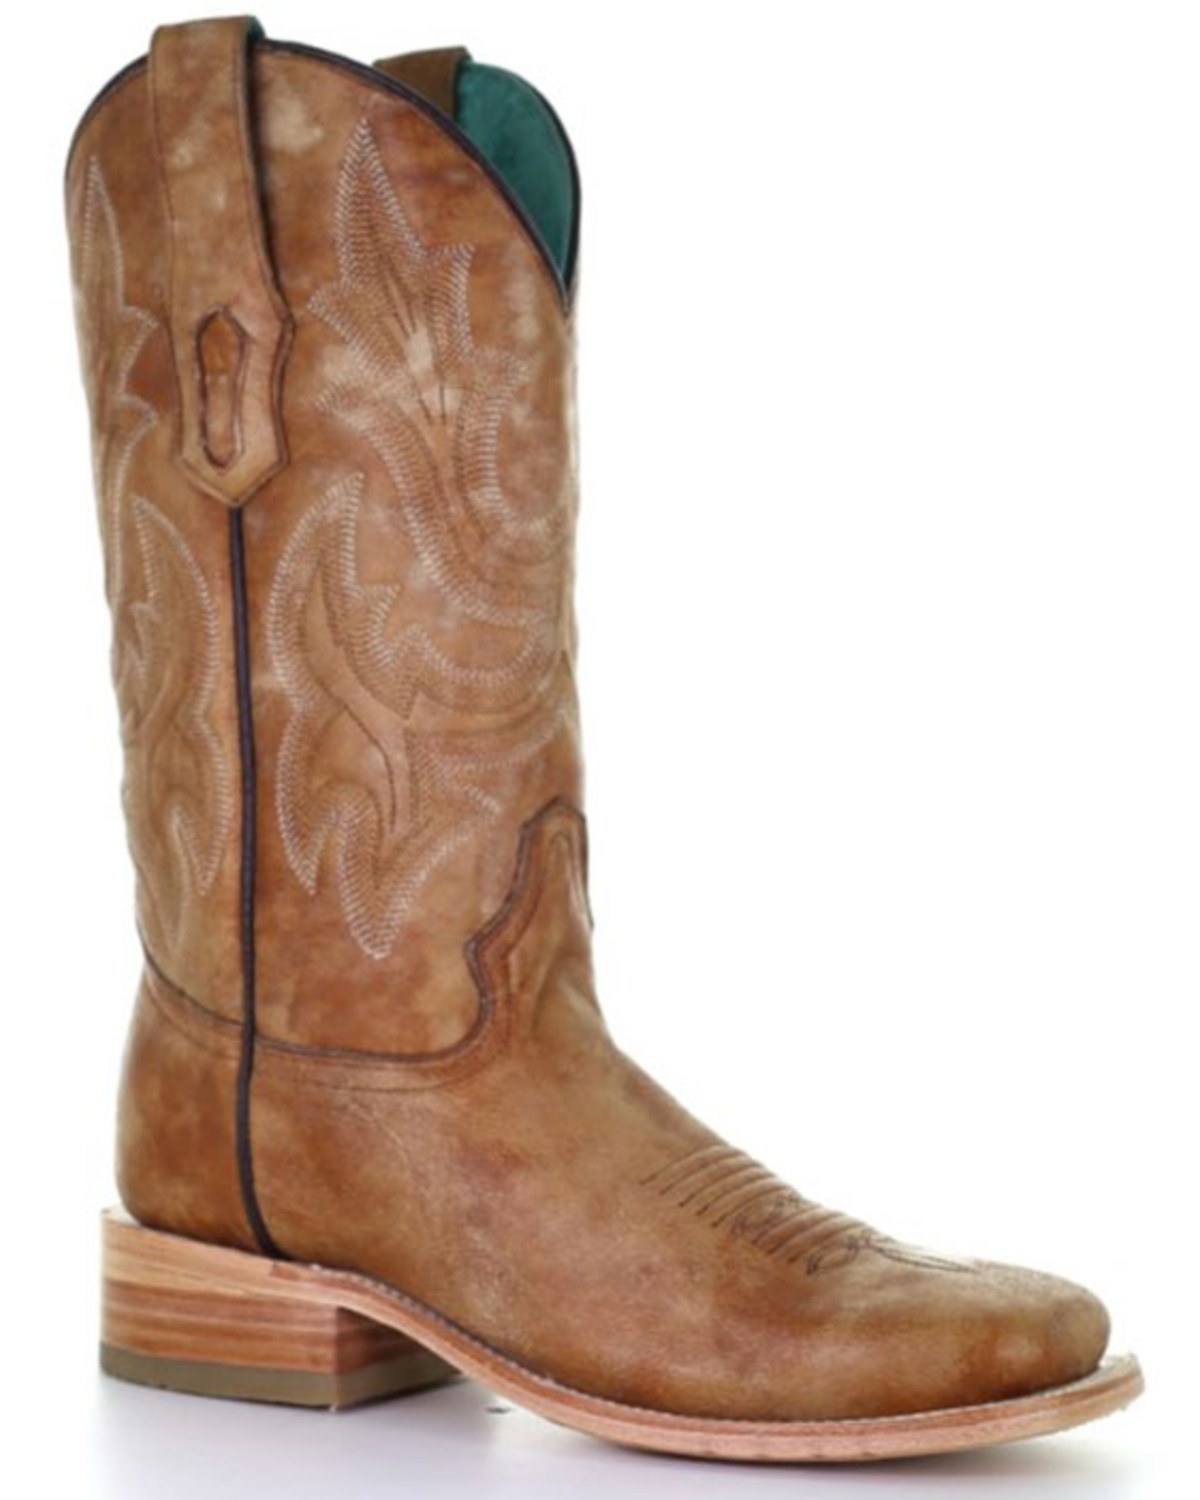 Corral Women's Sand Embroidery Western Boots - Broad Square Toe